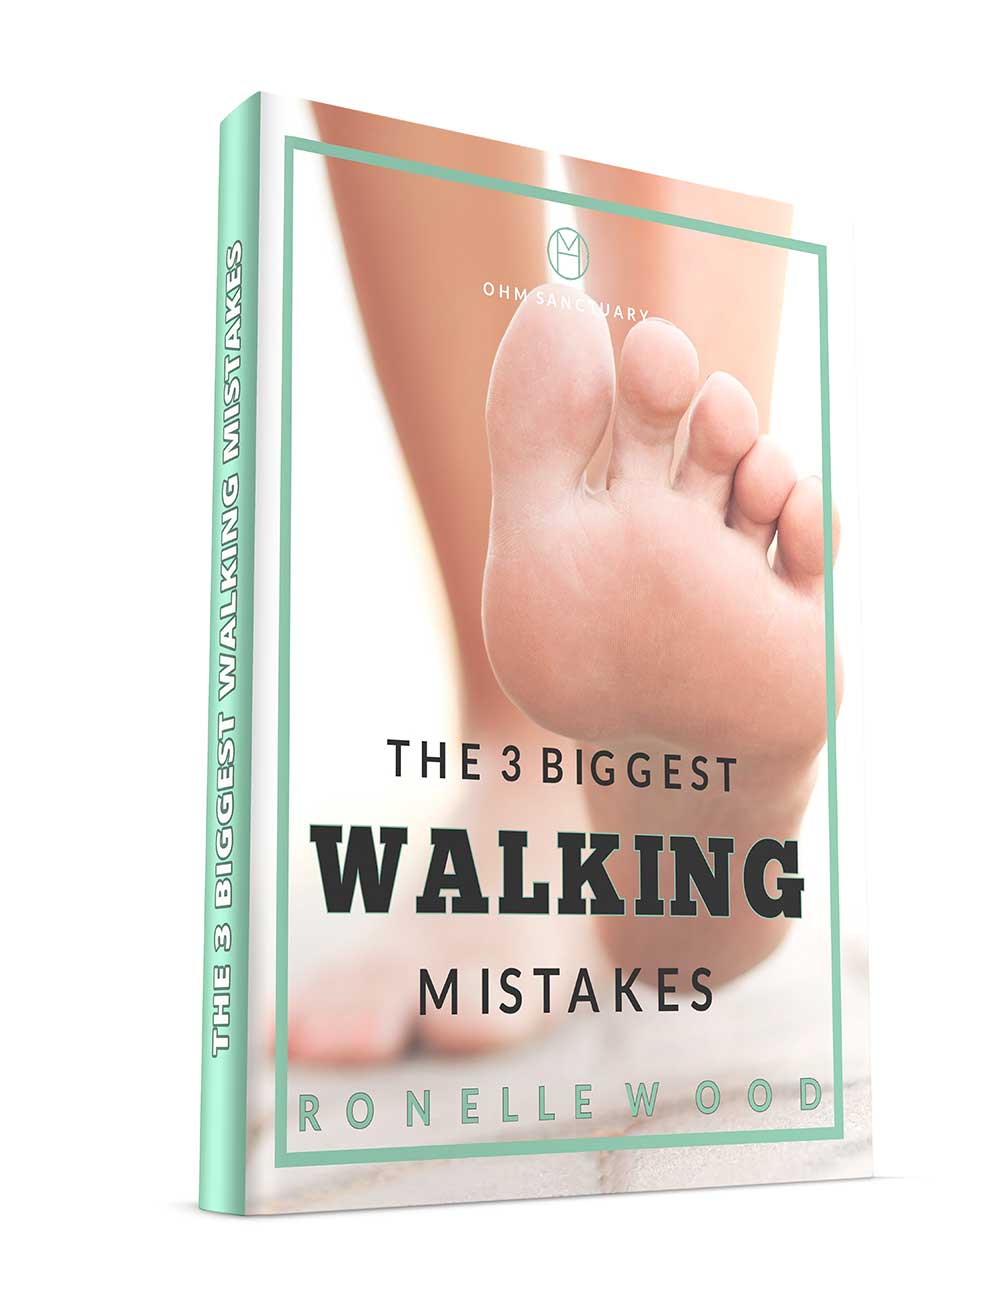 The 3 Biggest Walking Mistakes